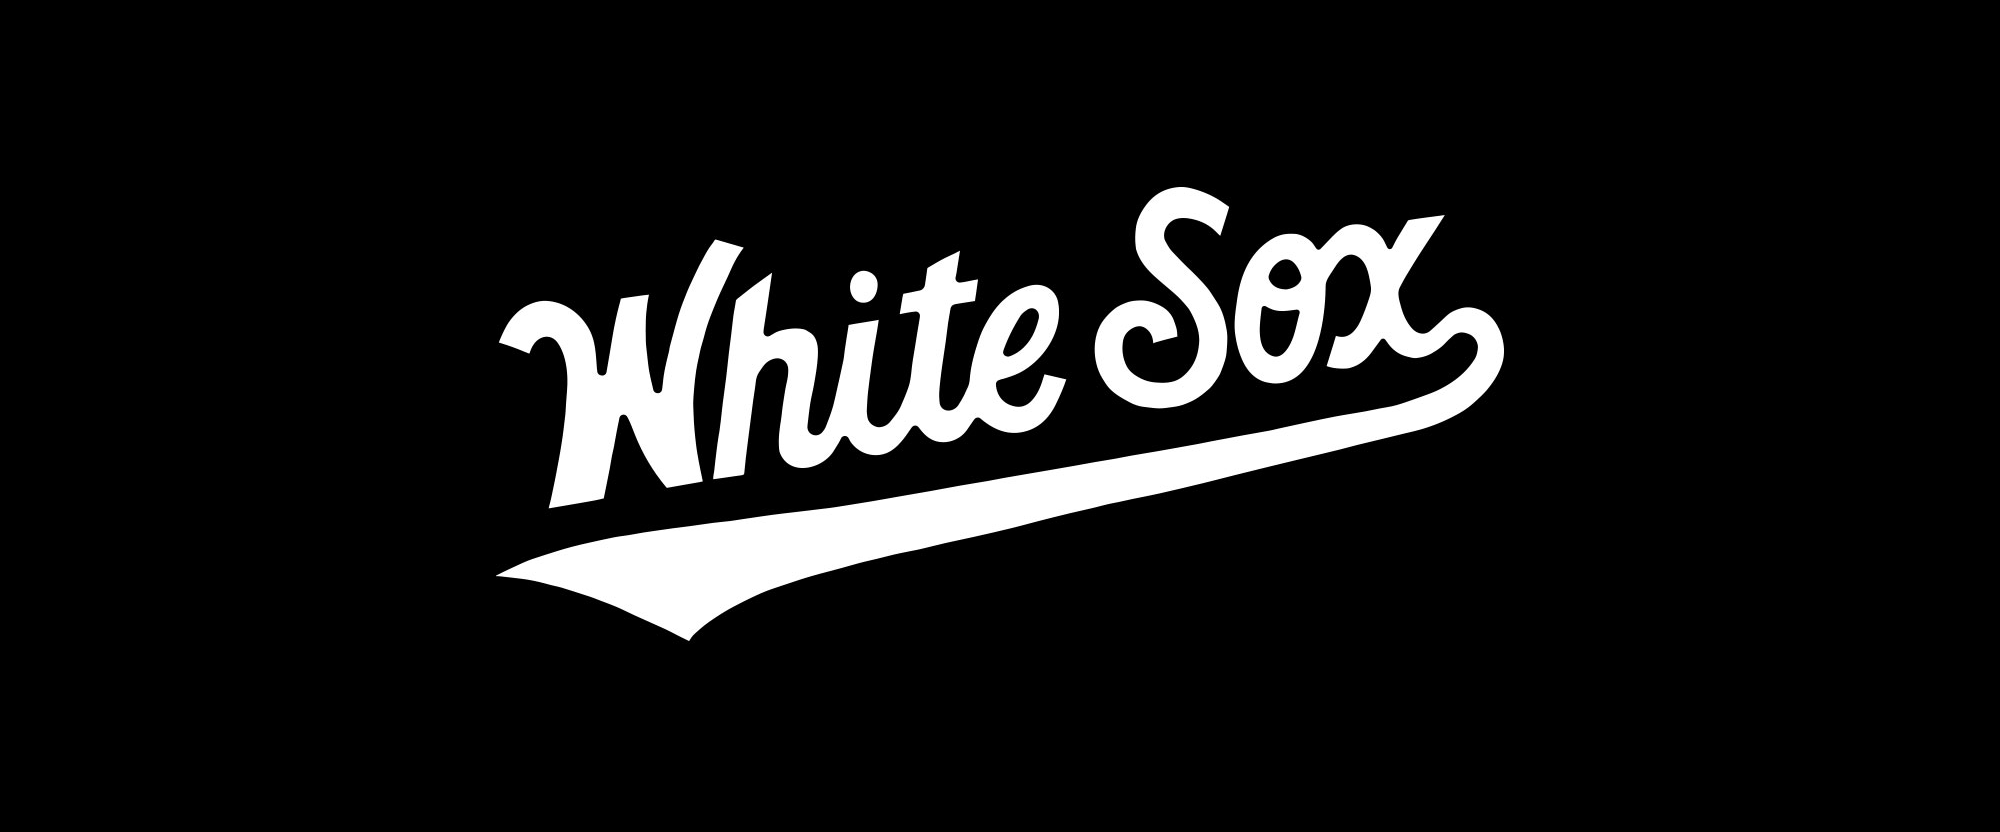 New Alternate Logo for Chicago White Sox by CONTINO